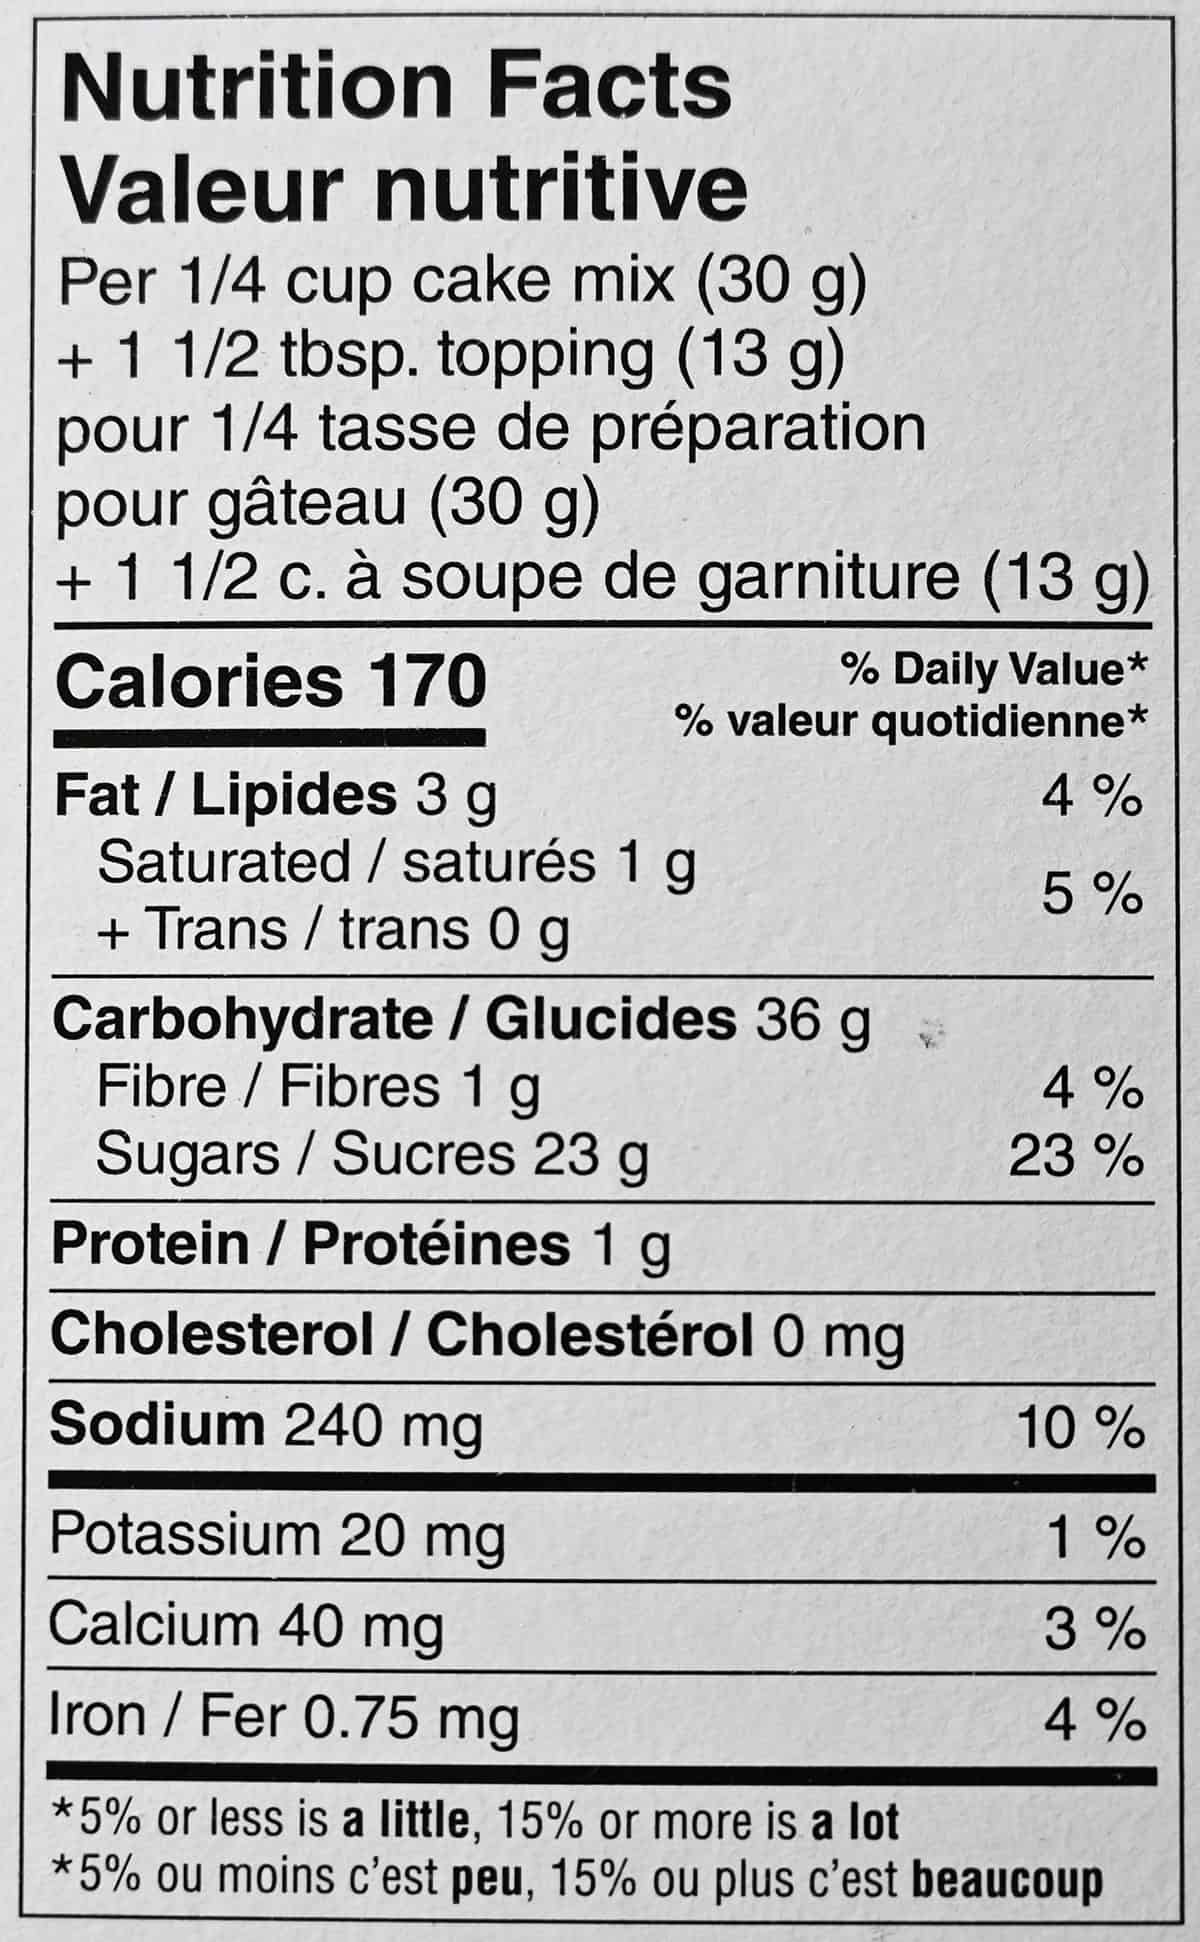 Image of the nutrition facts for the cake from the back of the box.